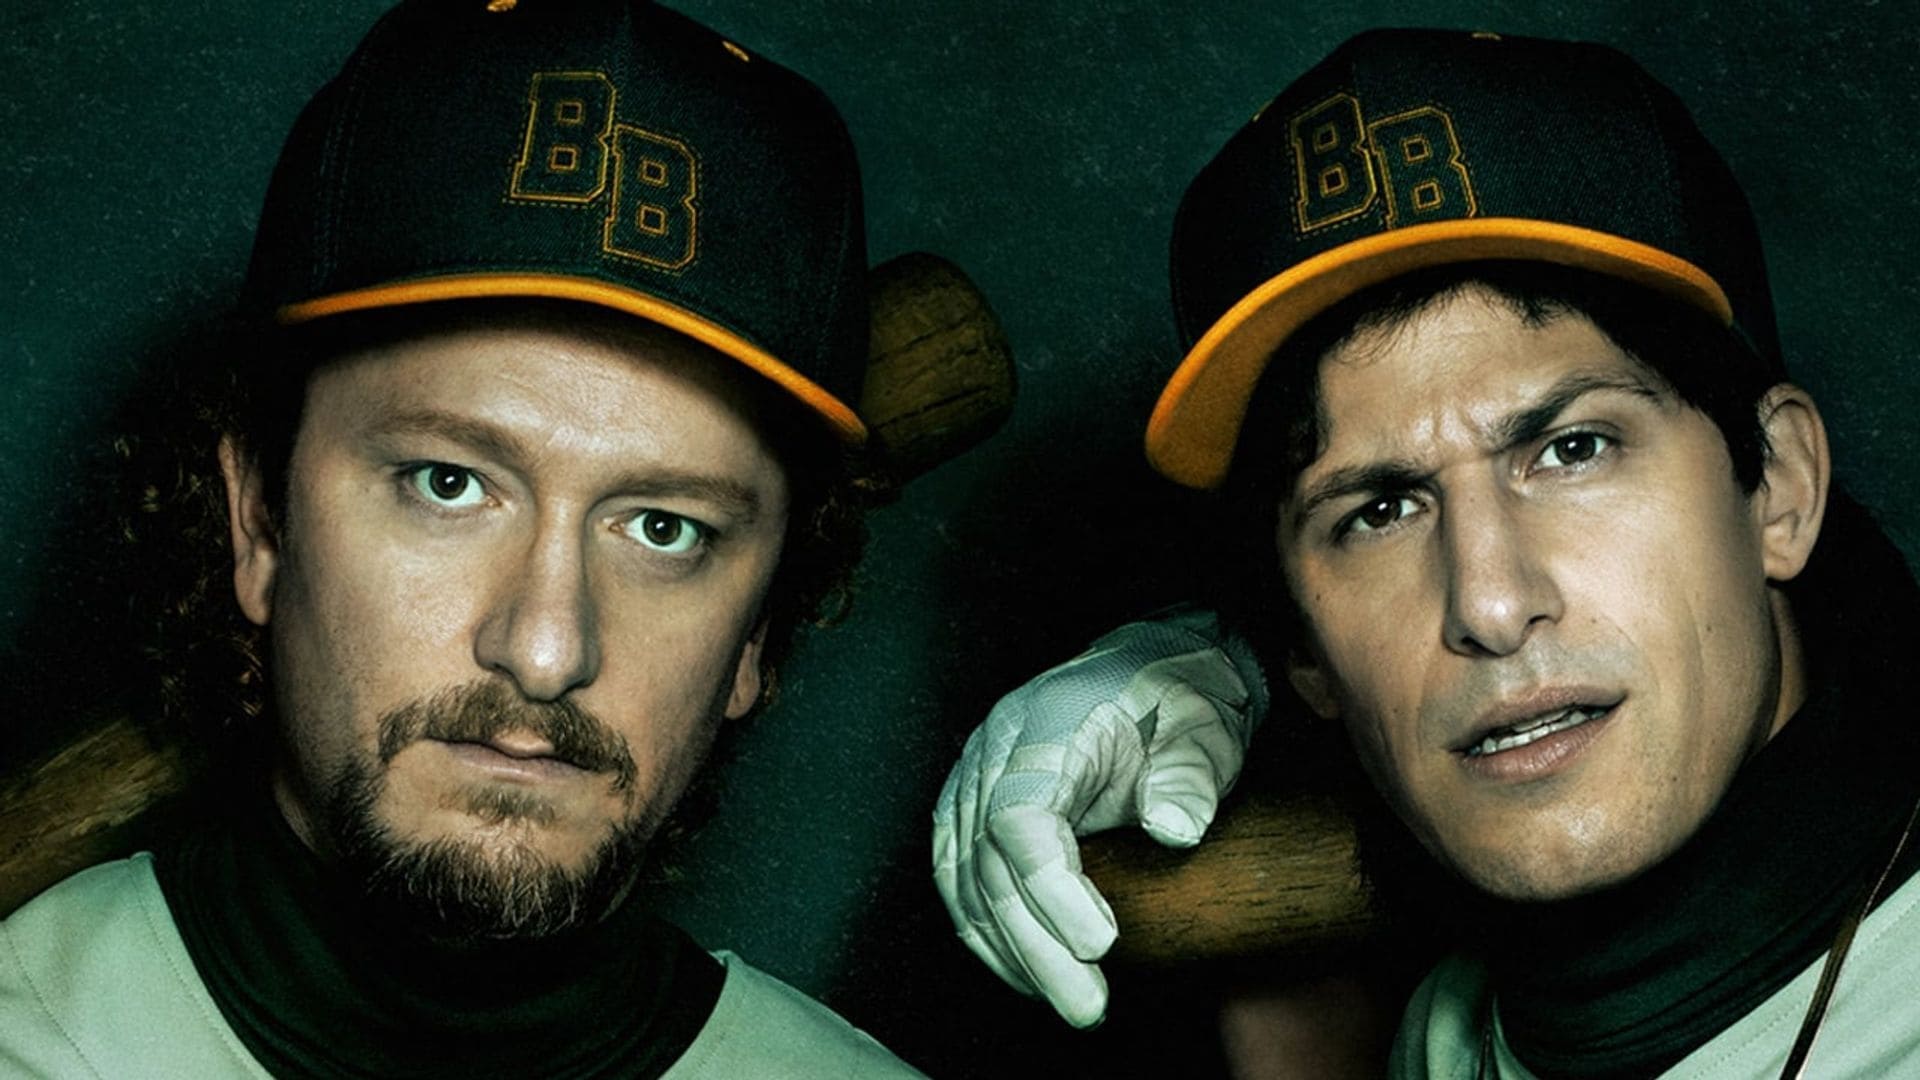 The Lonely Island Presents: The Unauthorized Bash Brothers Experience (2019)